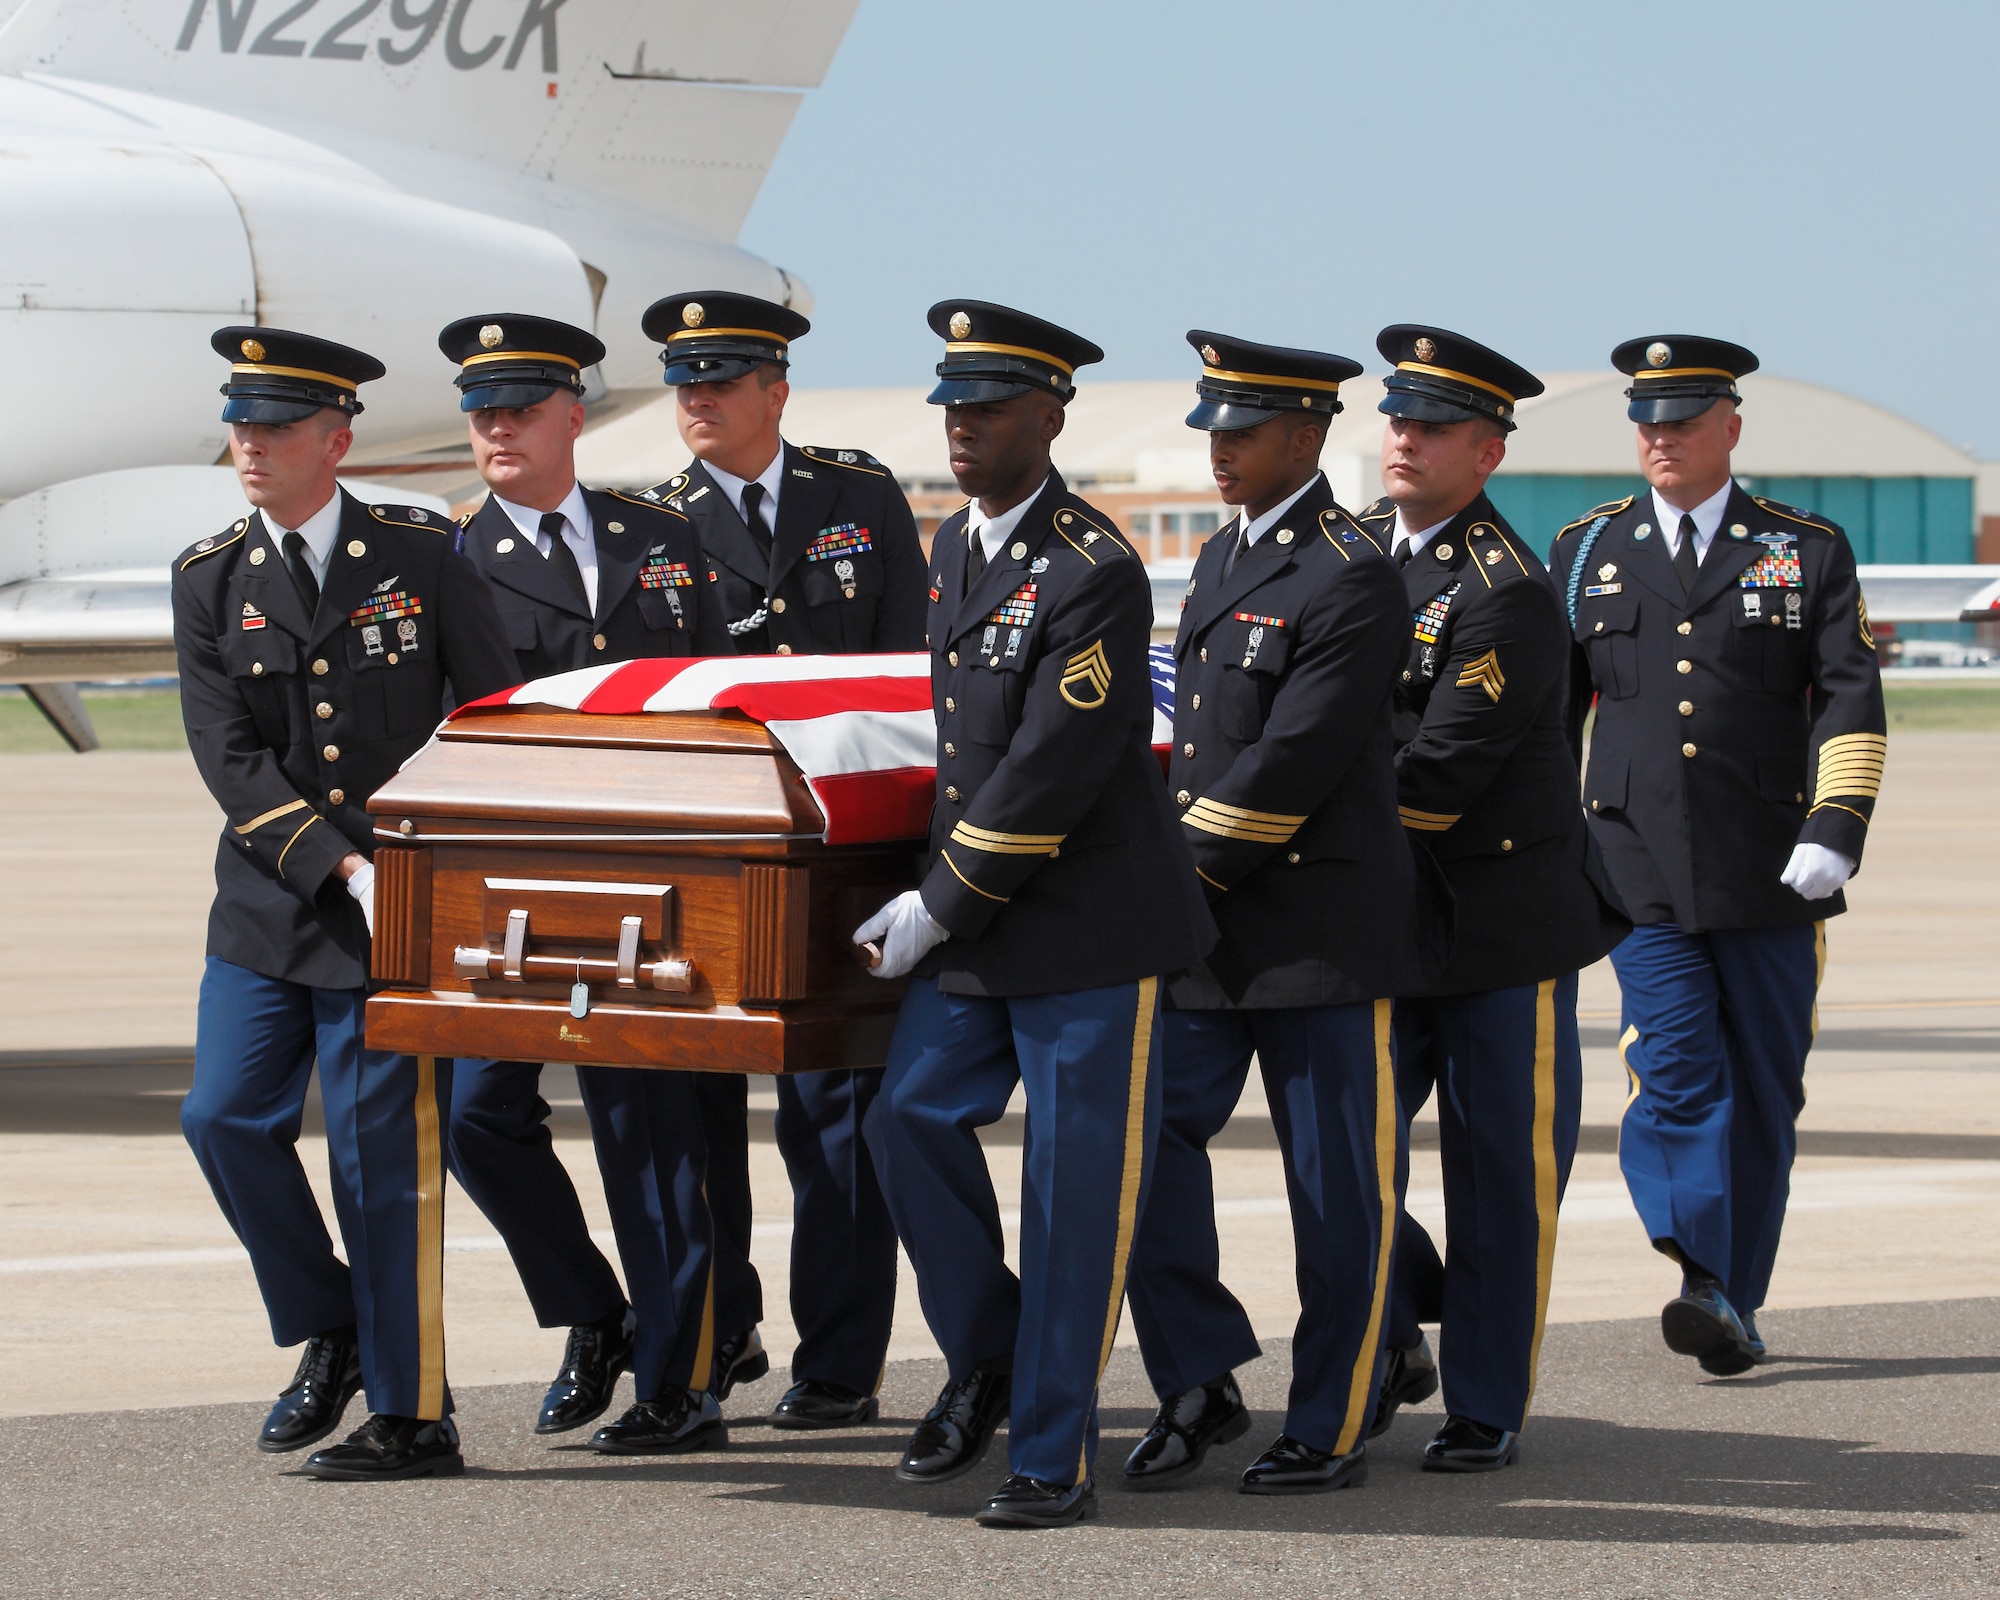 Members of the Army Honor Guard transfers Lt. Damon Leehan to his hearse during a dignified transfer at Will Rogers Air National Guard Base August 23, 2011.
(U.S. Army Photo by Sgt First Class Kendall James/Released)